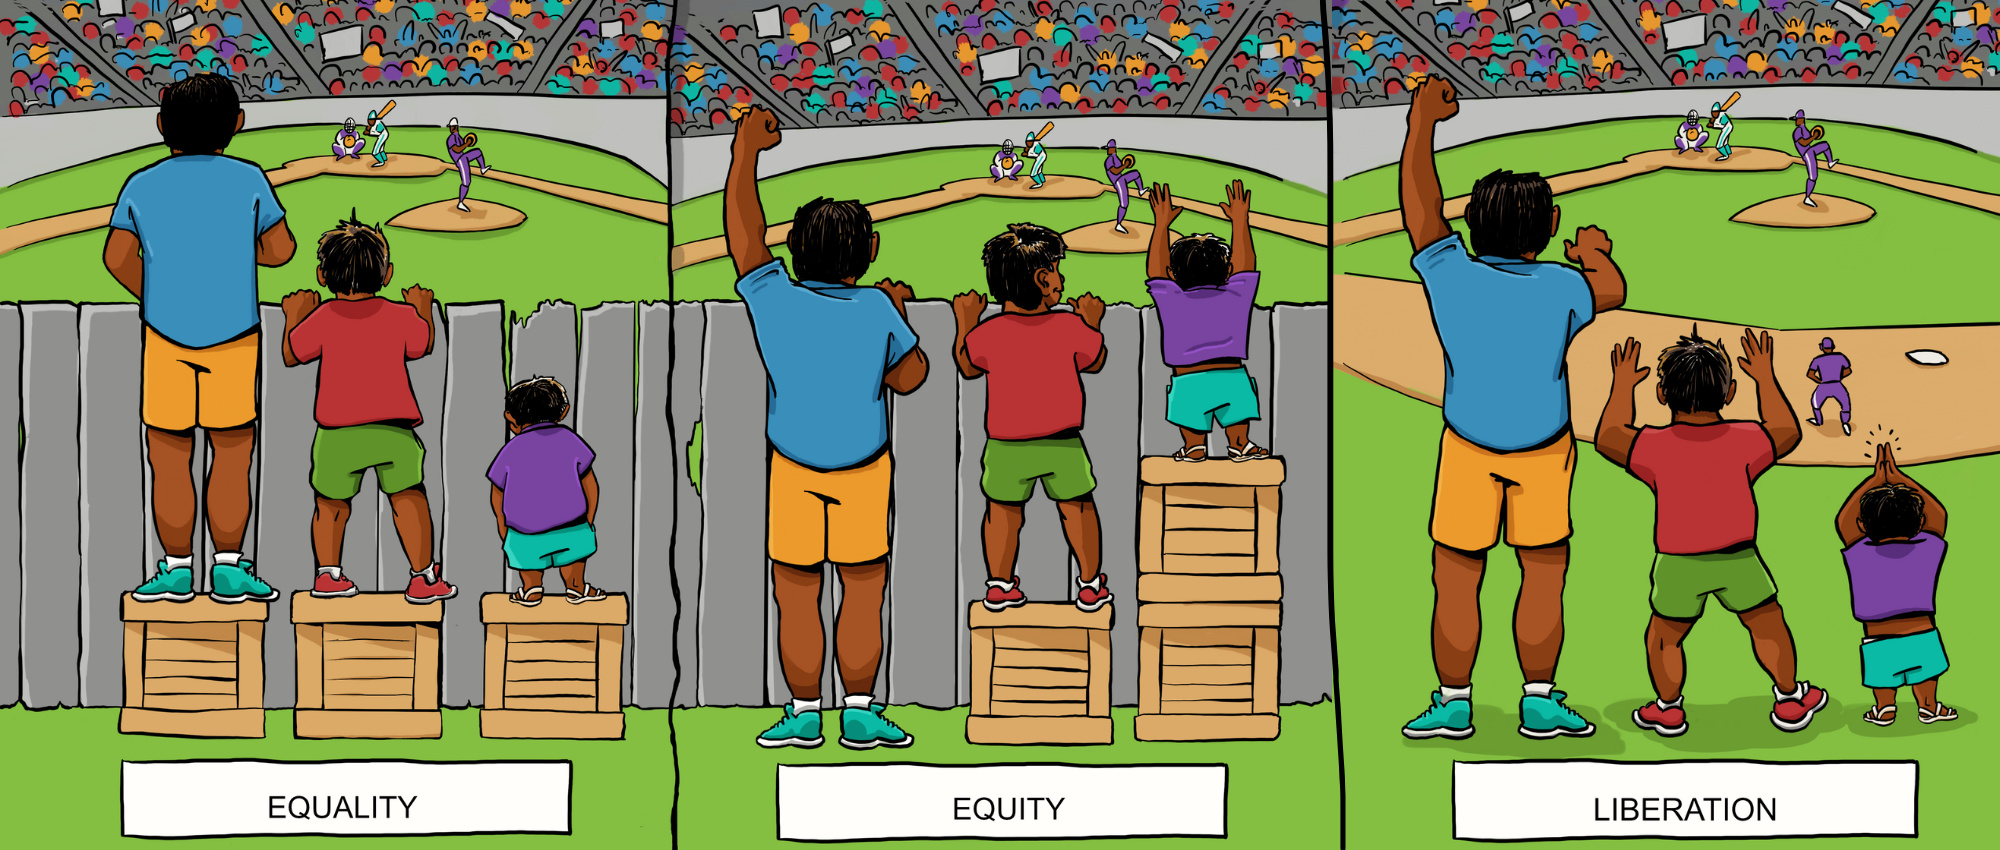 Illustration showing metaphors for equality (three people of different heights trying to watch a ball game over a fence, standing on identical boxes) equity (with the same three people standing on different height boxes so now all of them can see), and liberation, where the fence is not present, so all the people can see.